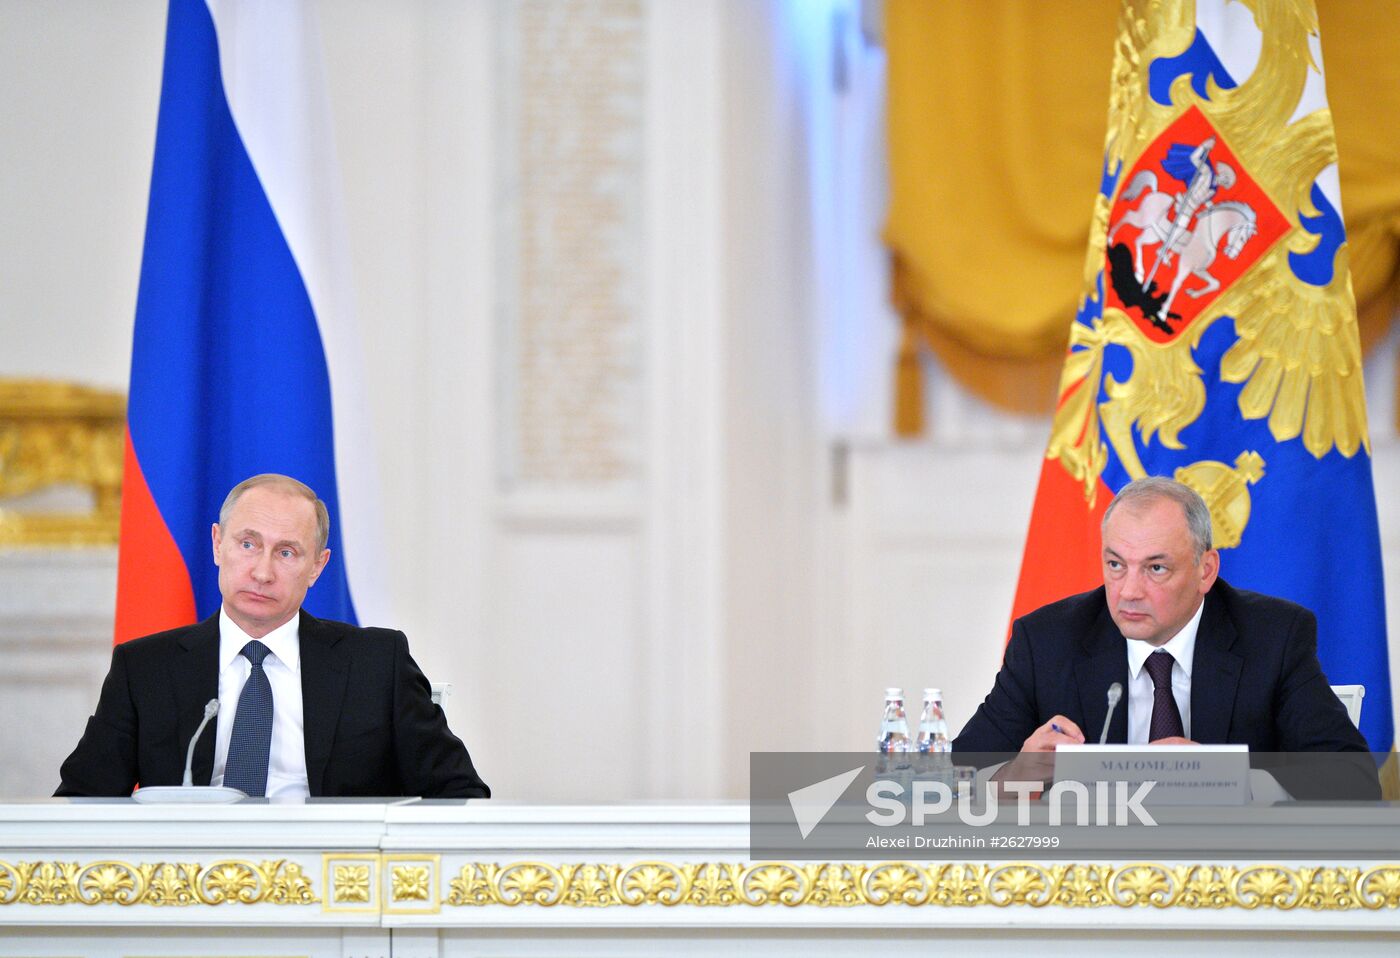 Russian President Vladimir Putin chairs joint meeting of councils on inter-ethnic relations and Russian language